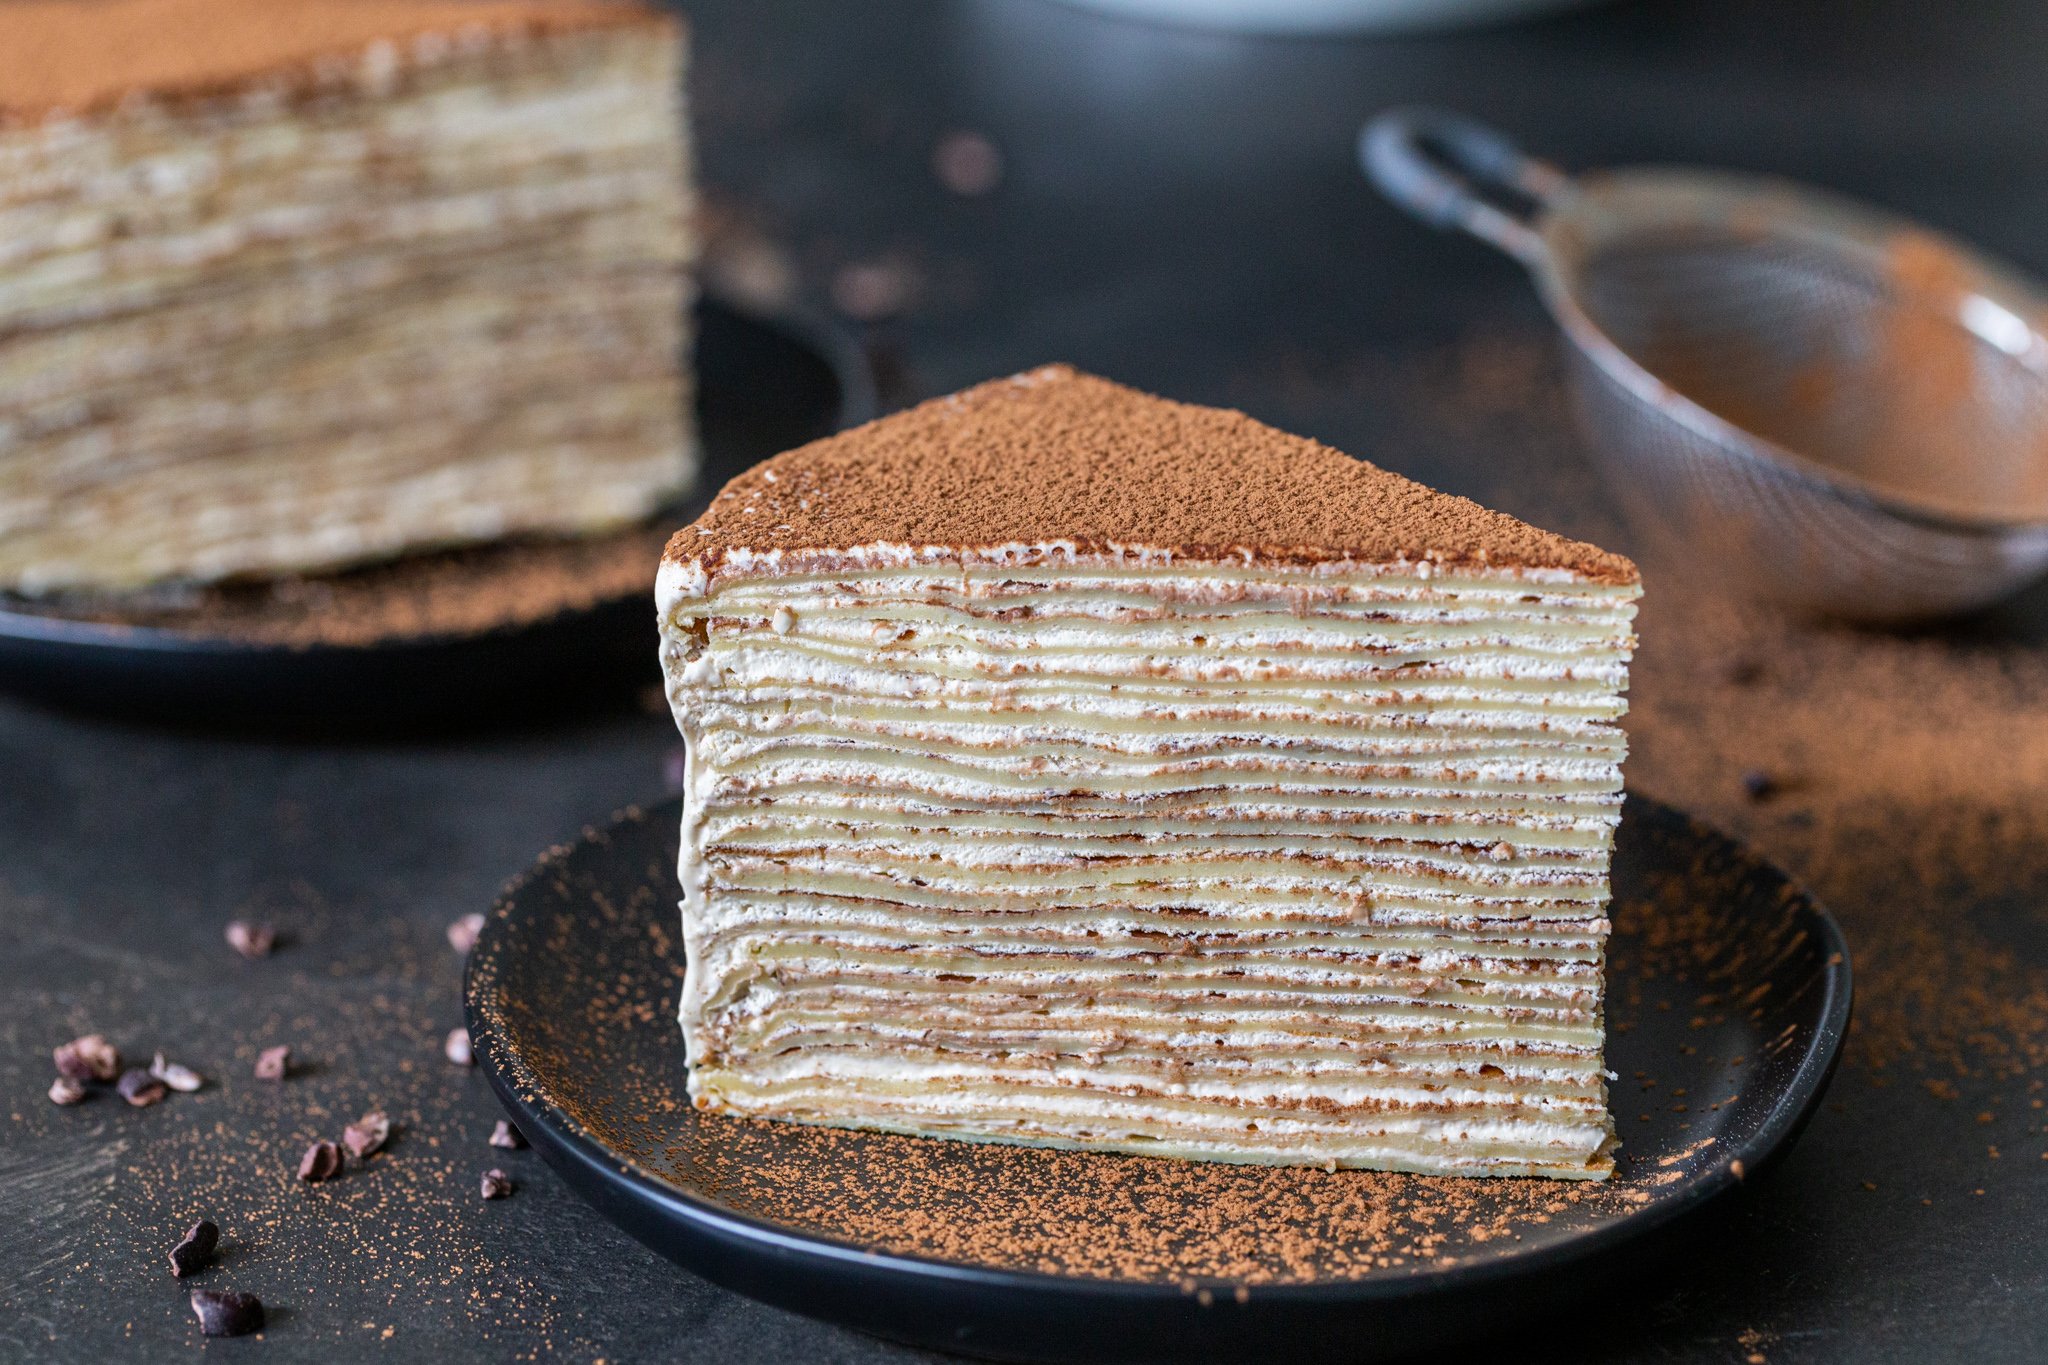 How To Make Chocolate Crepe Cake - The Best Vegan Crepe Cake - Whisk me Free